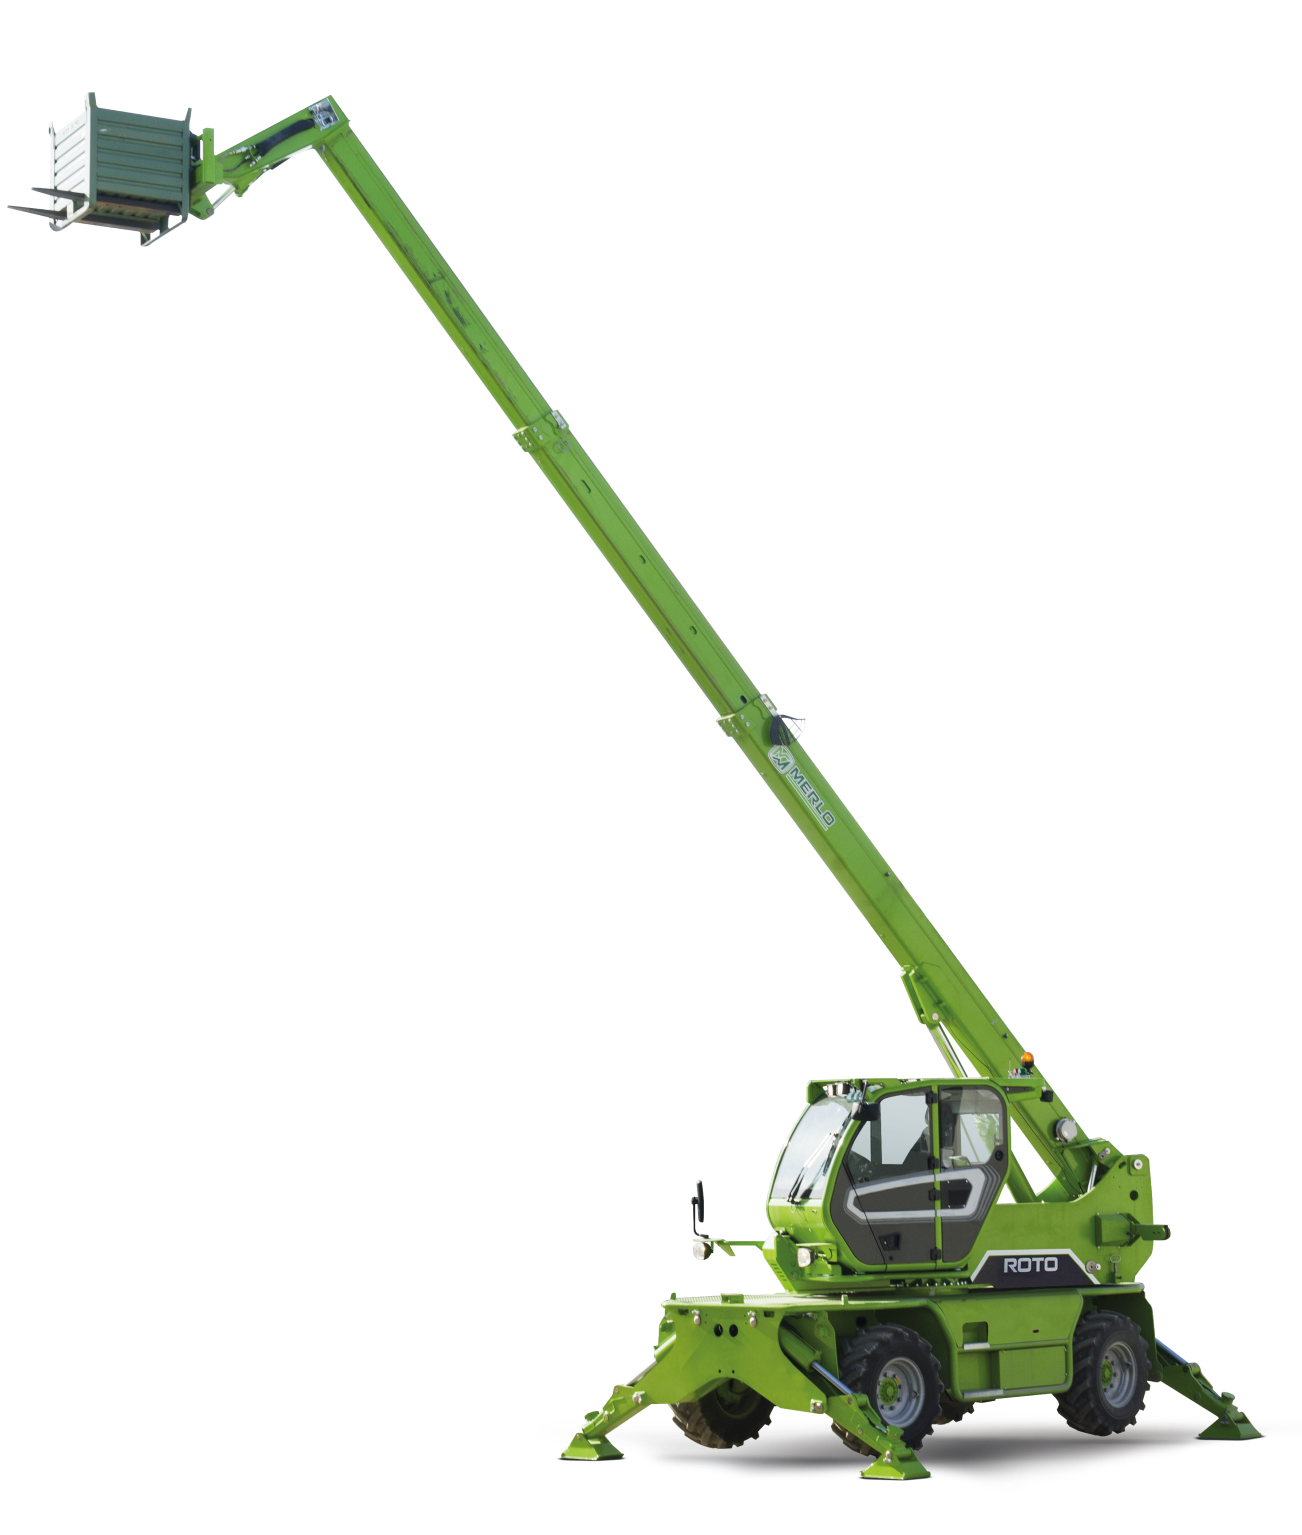 Merlo ROTO40.16 S, the smallest of the rotating telehandlers. Pictured with boom extended and front and back stabilisers.